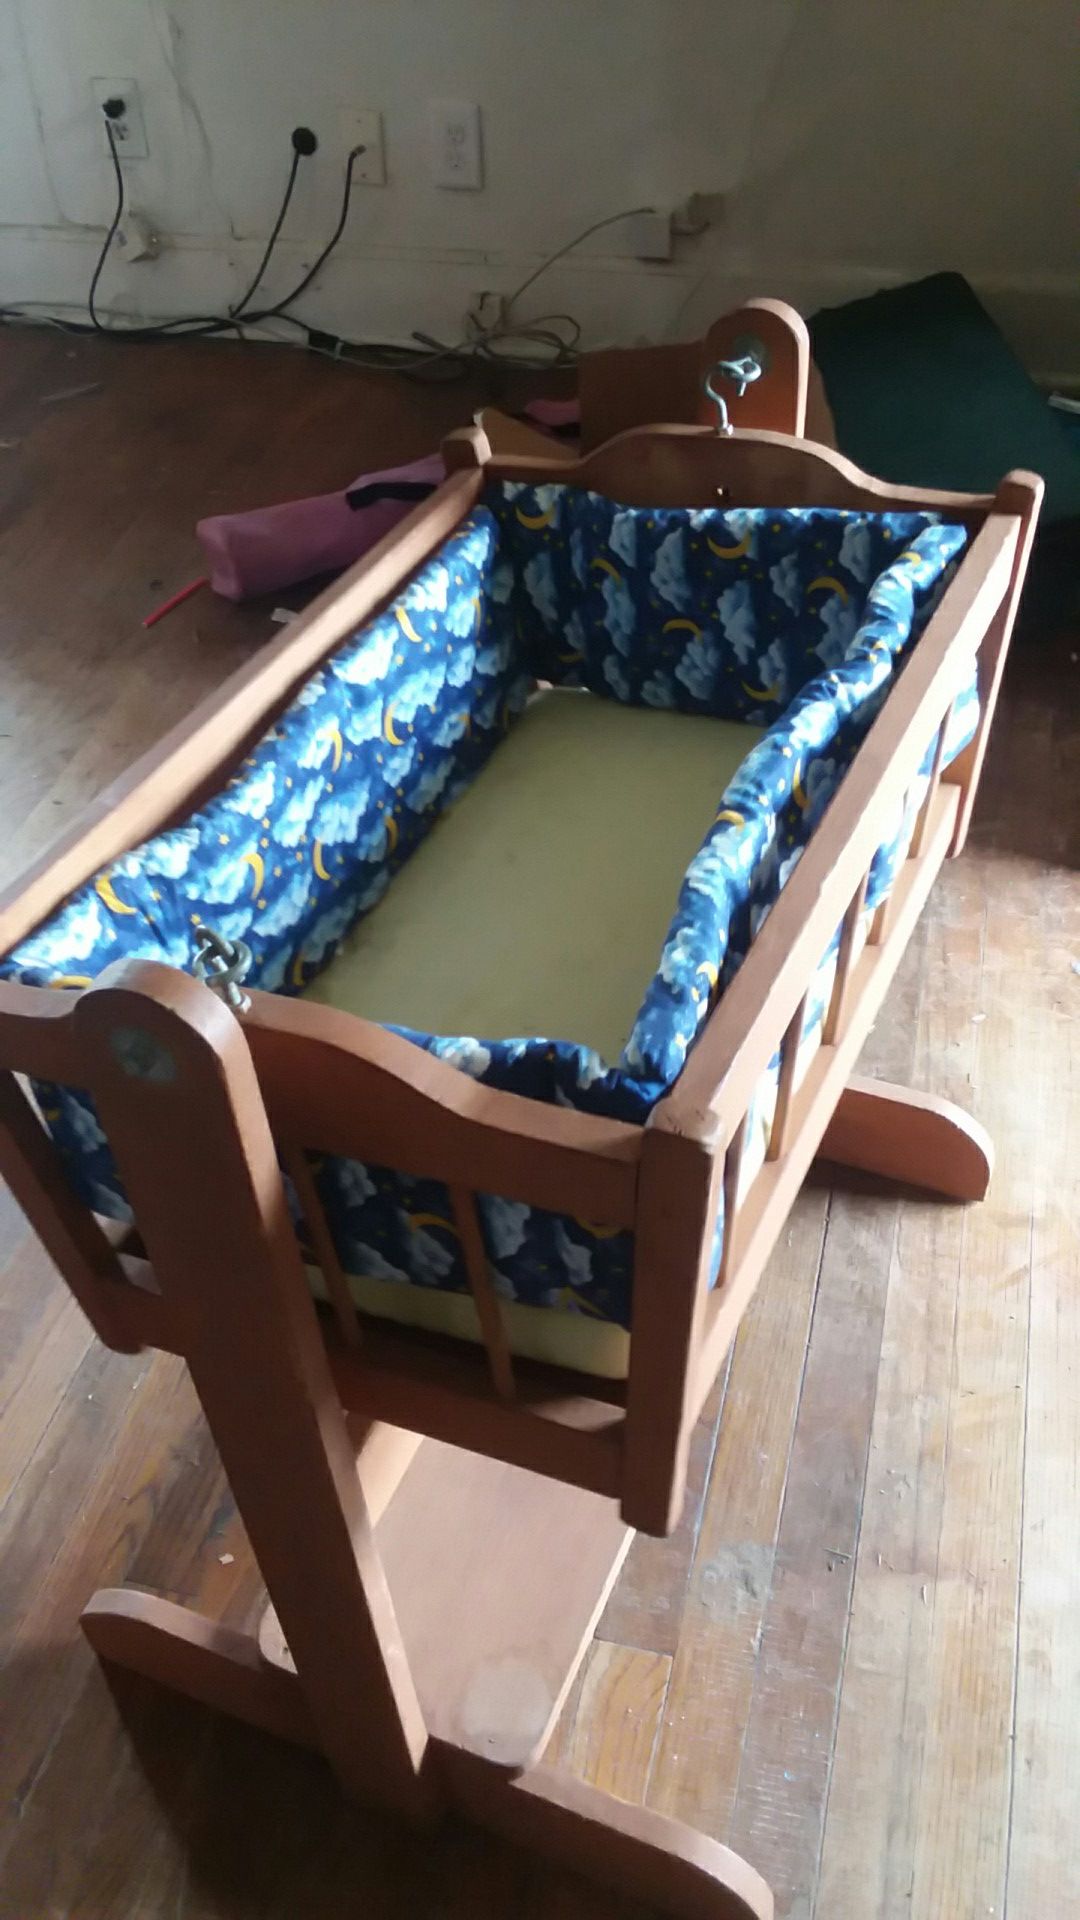 Bassinet toy